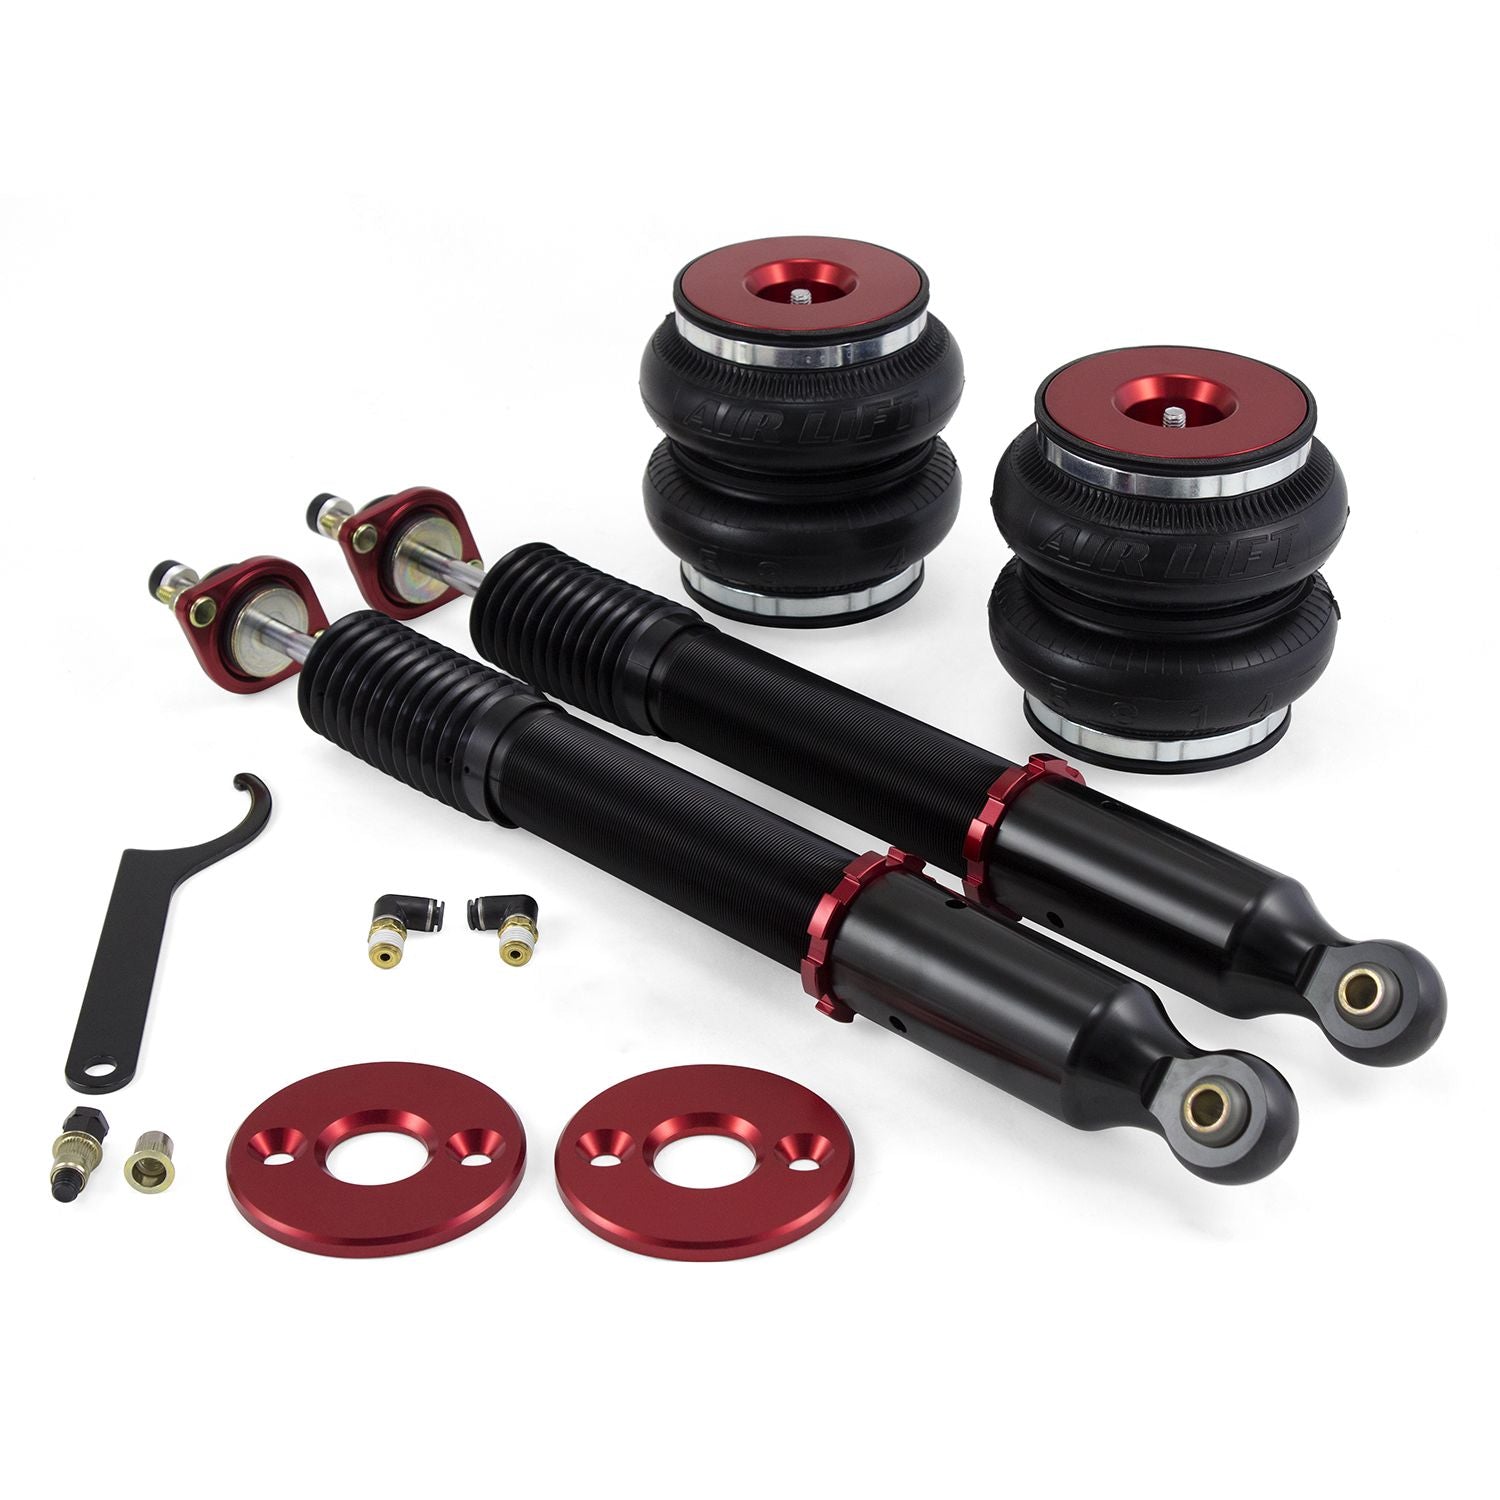 Elevate your BMW's reputation by lowering it...with 5 inches of drop and all the versatility of air suspension.